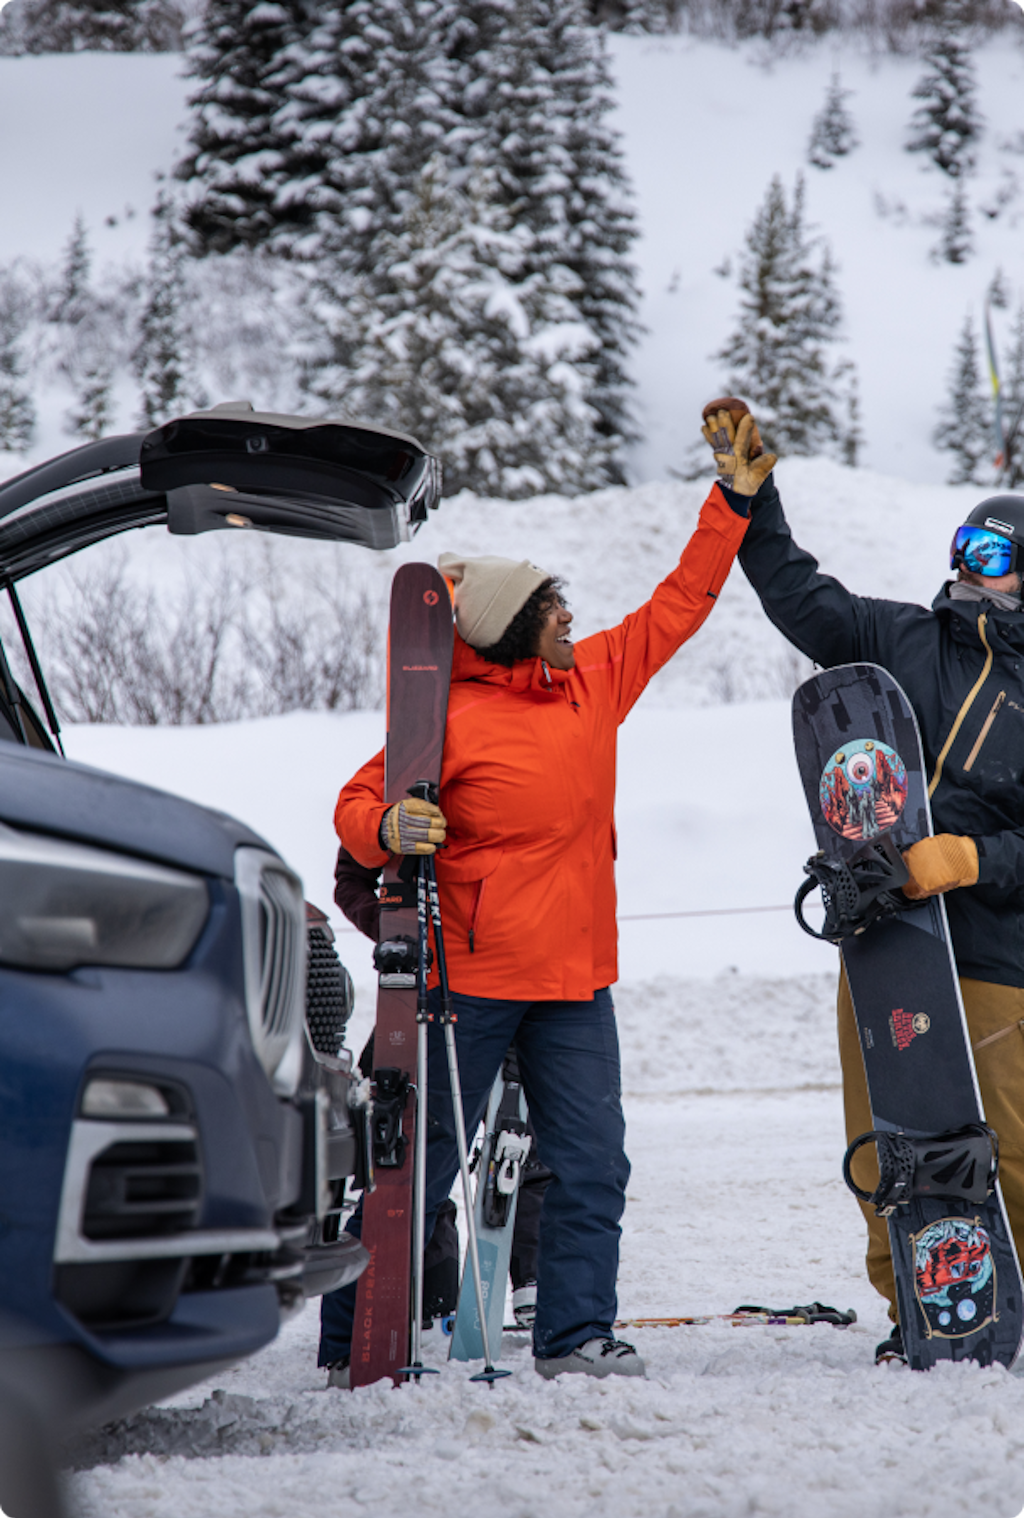 Skier and Snowboarder high five in parking lot